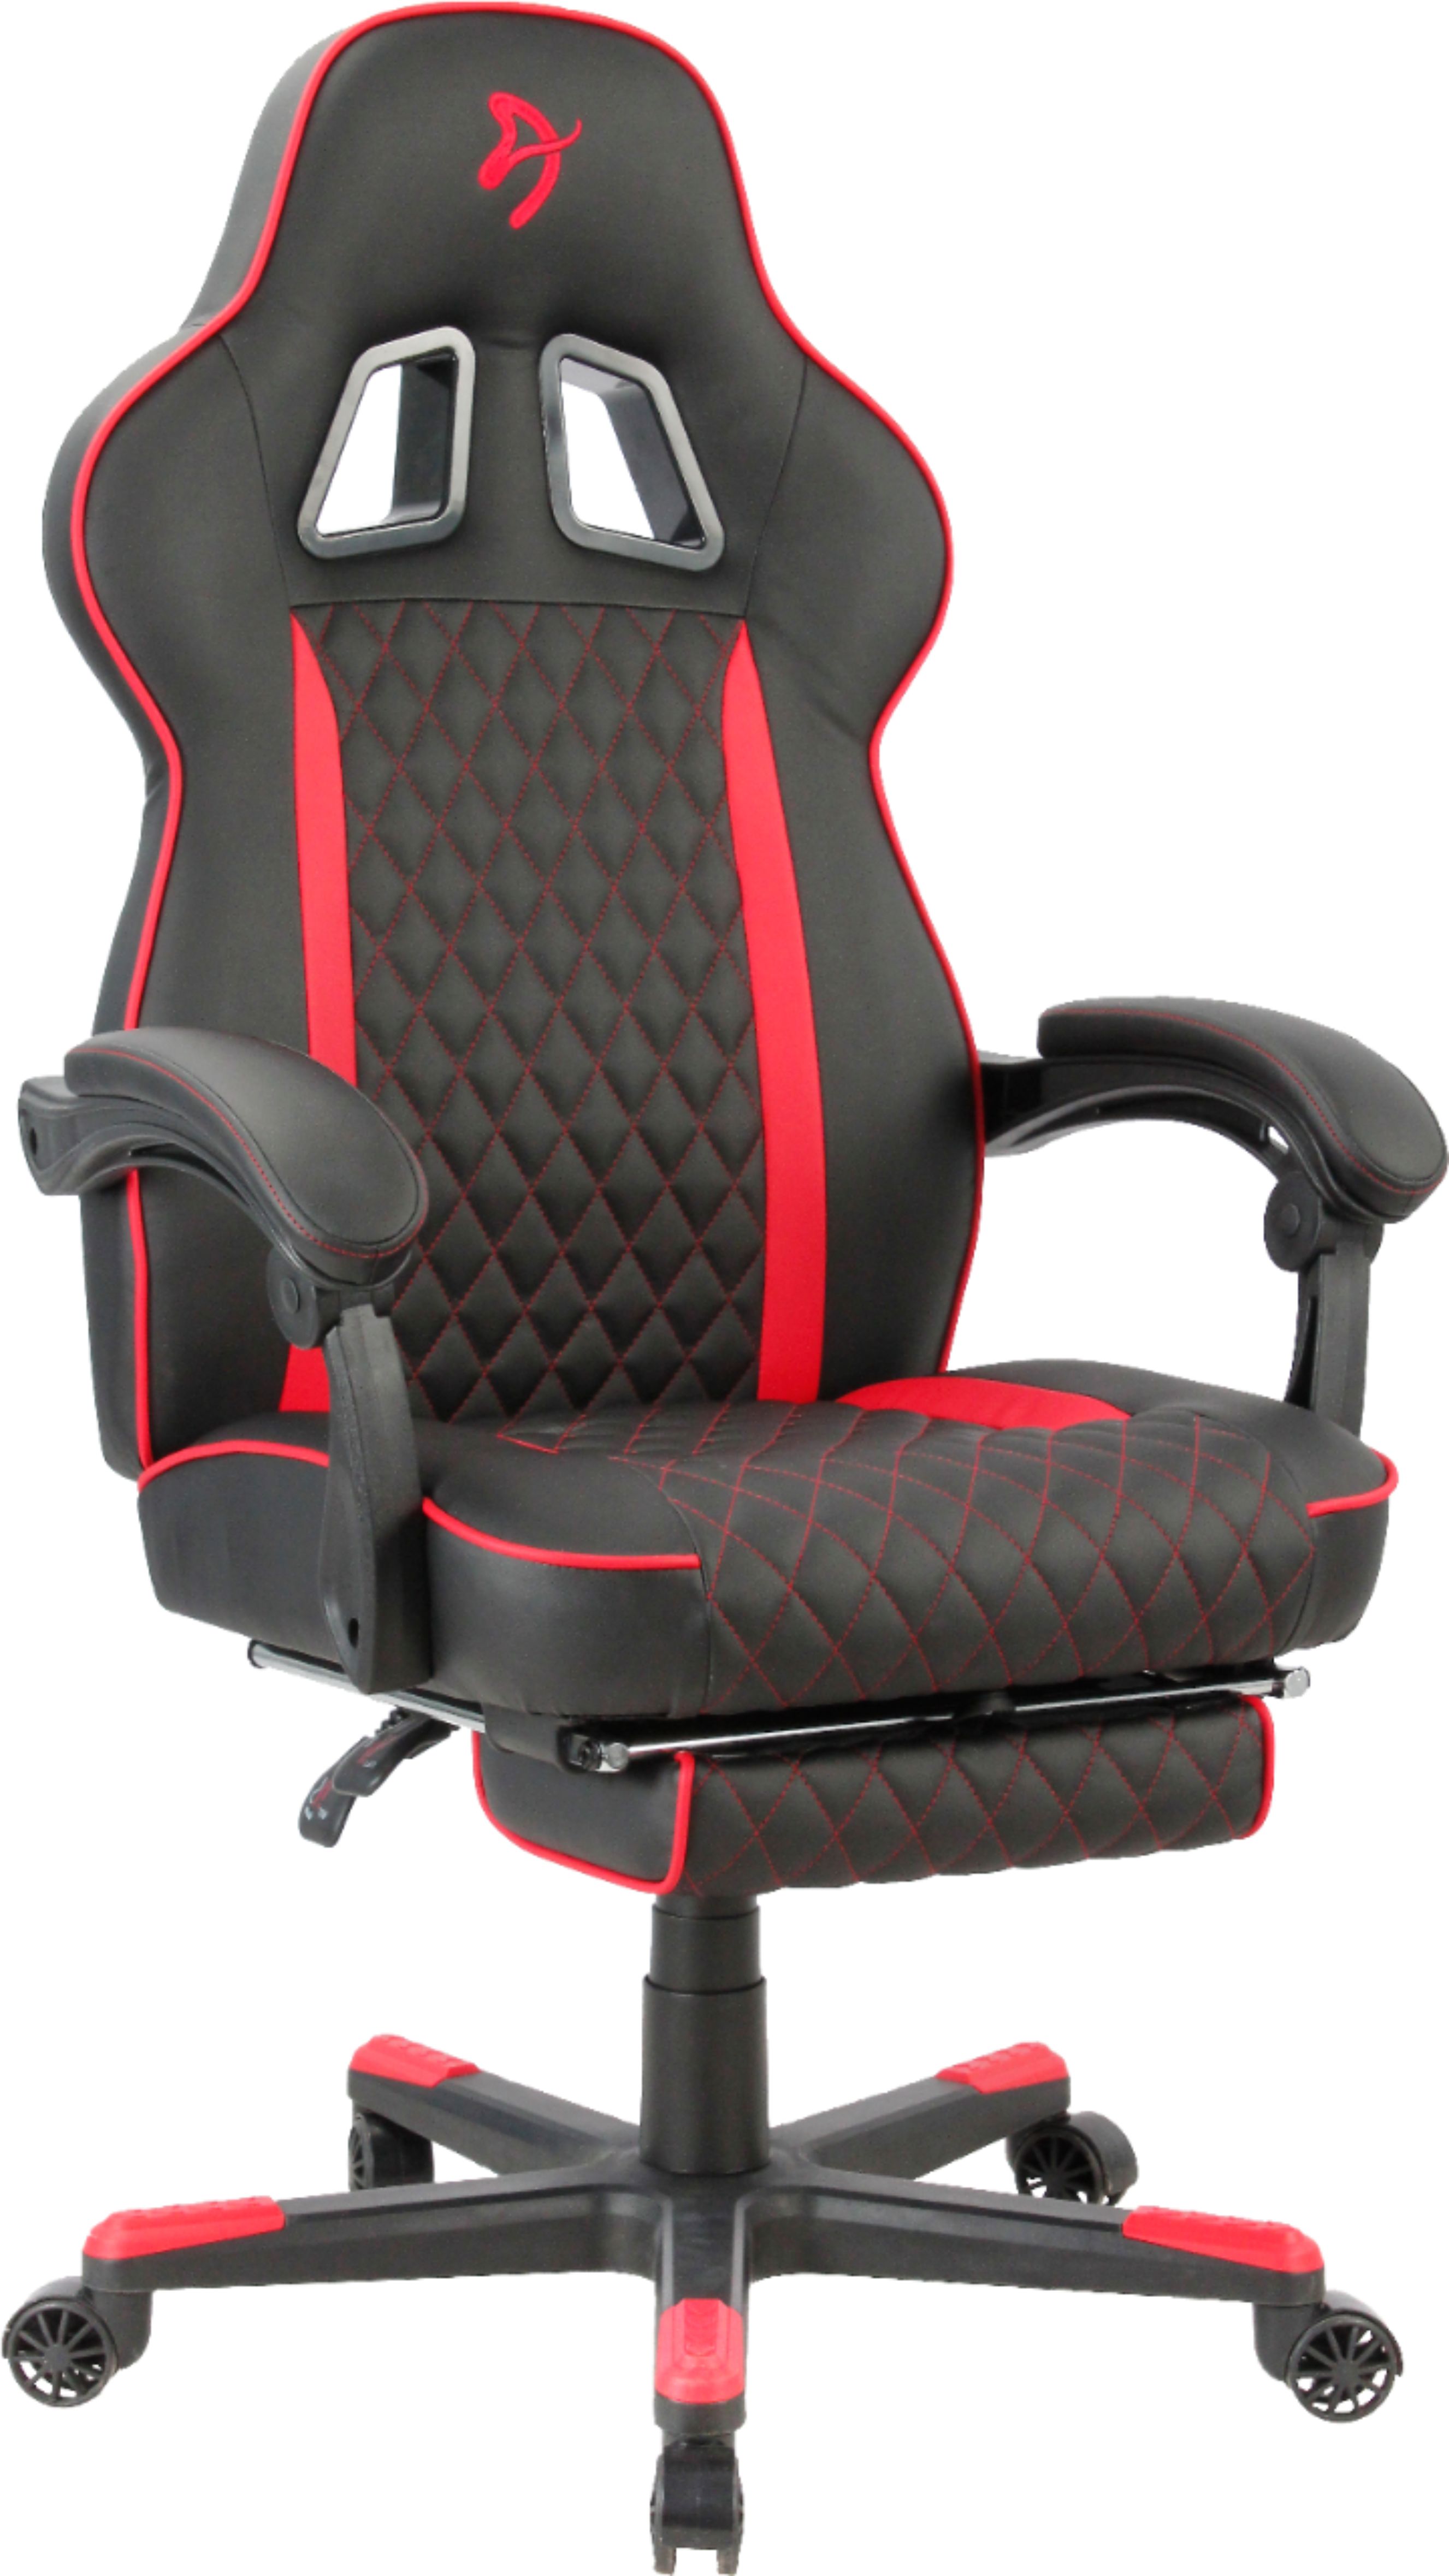 Angle View: AKRacing - Office Series Obsidian Chair